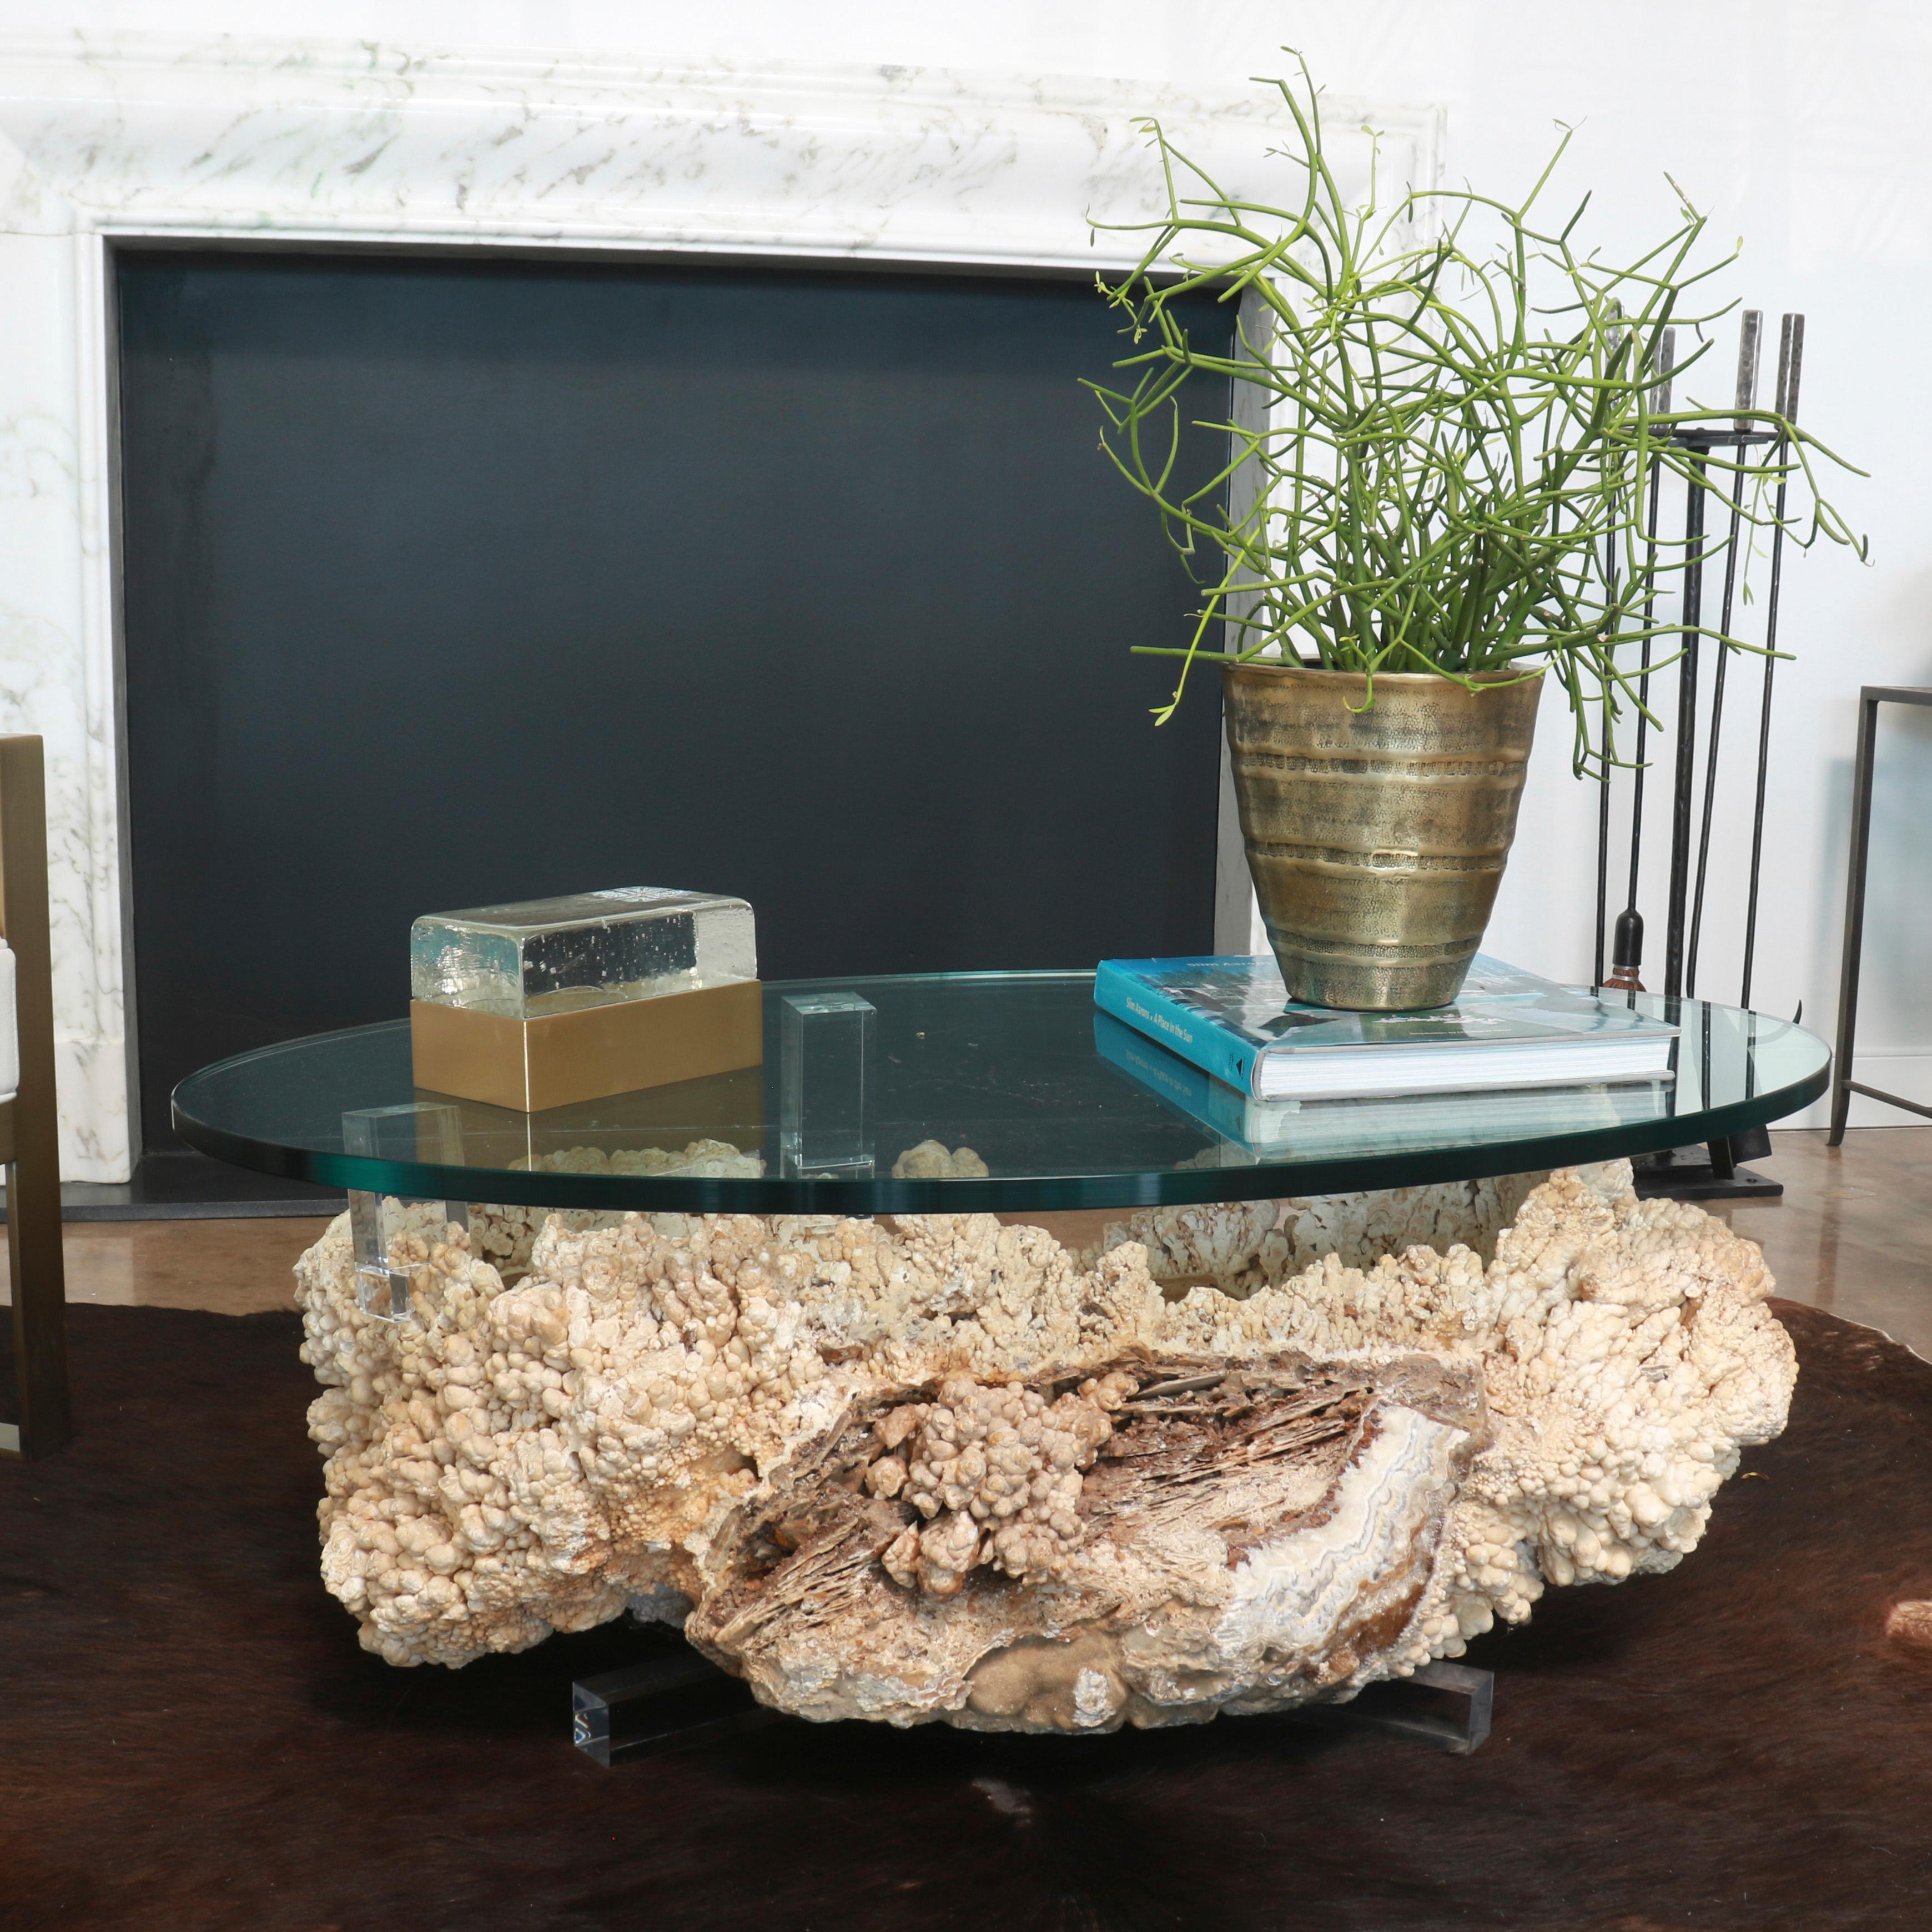 Our mineral and glass table is a unique piece of nature-born modern art. The glass top gives you the amazing view of the swirls inside a naturally formed mineral rock bowl, while providing a stable and sturdy surface to rest your drink or tablet.